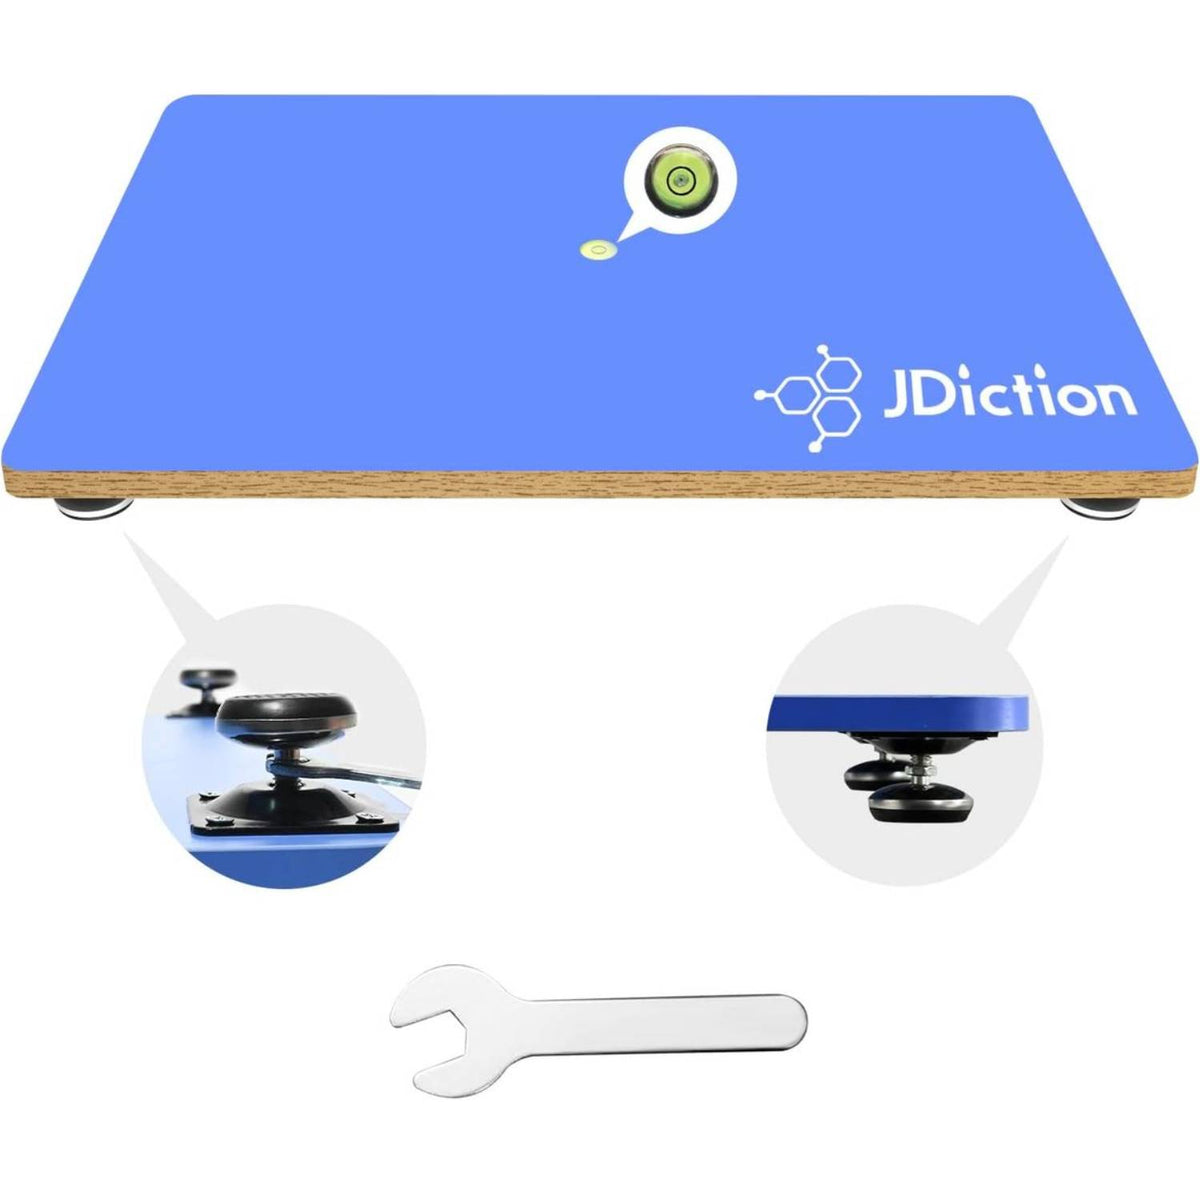 Resin Leveling Table for Epoxy Resin & Art, 16 x 14 Adjustable Surface  Leveling Board with Silicone Mat, Measuring Cup, Droppers and Wood Sticks,  Price $35. For USA. Interested DM me for